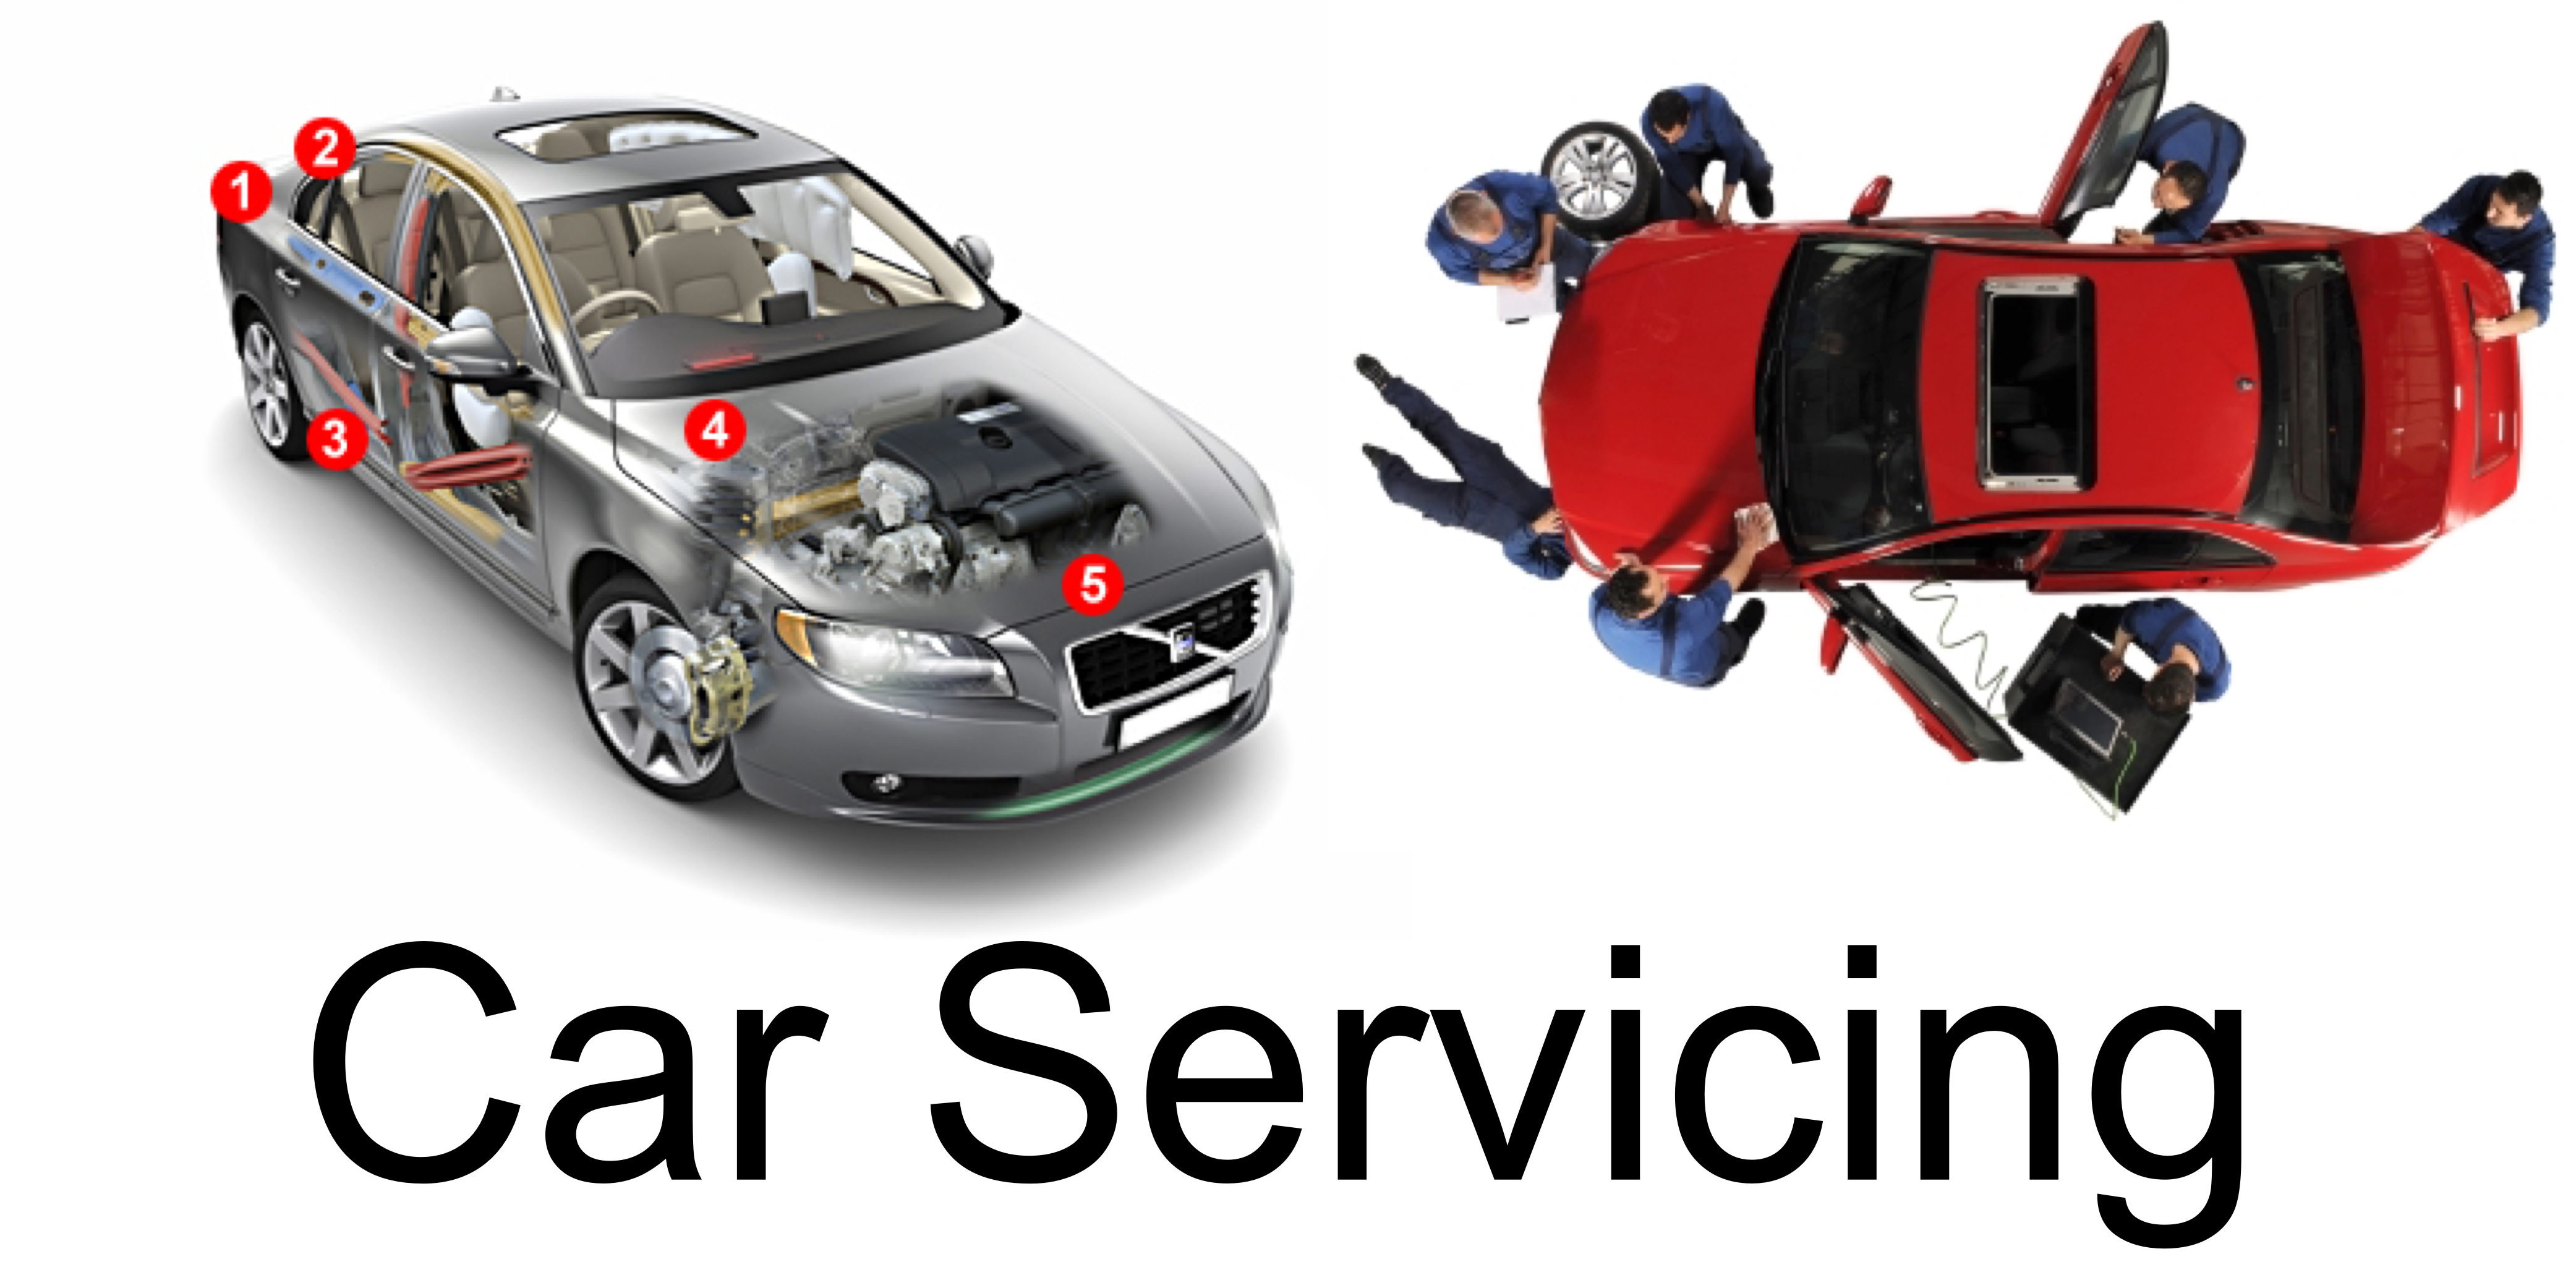 ANGUS TYRES BRECHIN OFFER CAR SERVICING